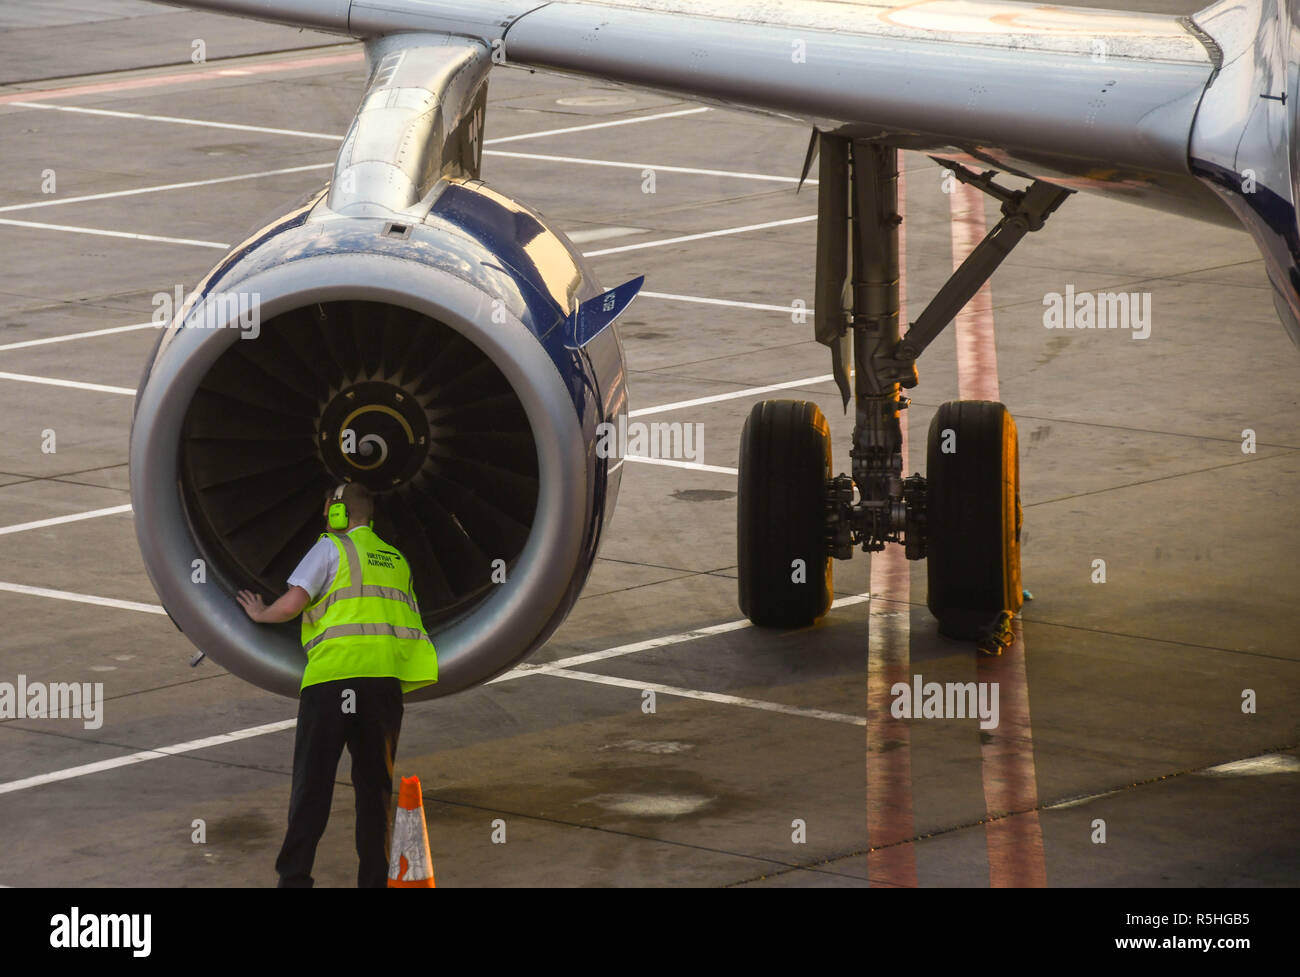 Pilot of a British Airways Airbus jet doing a walk-around check and inspection before a flight. Stock Photo